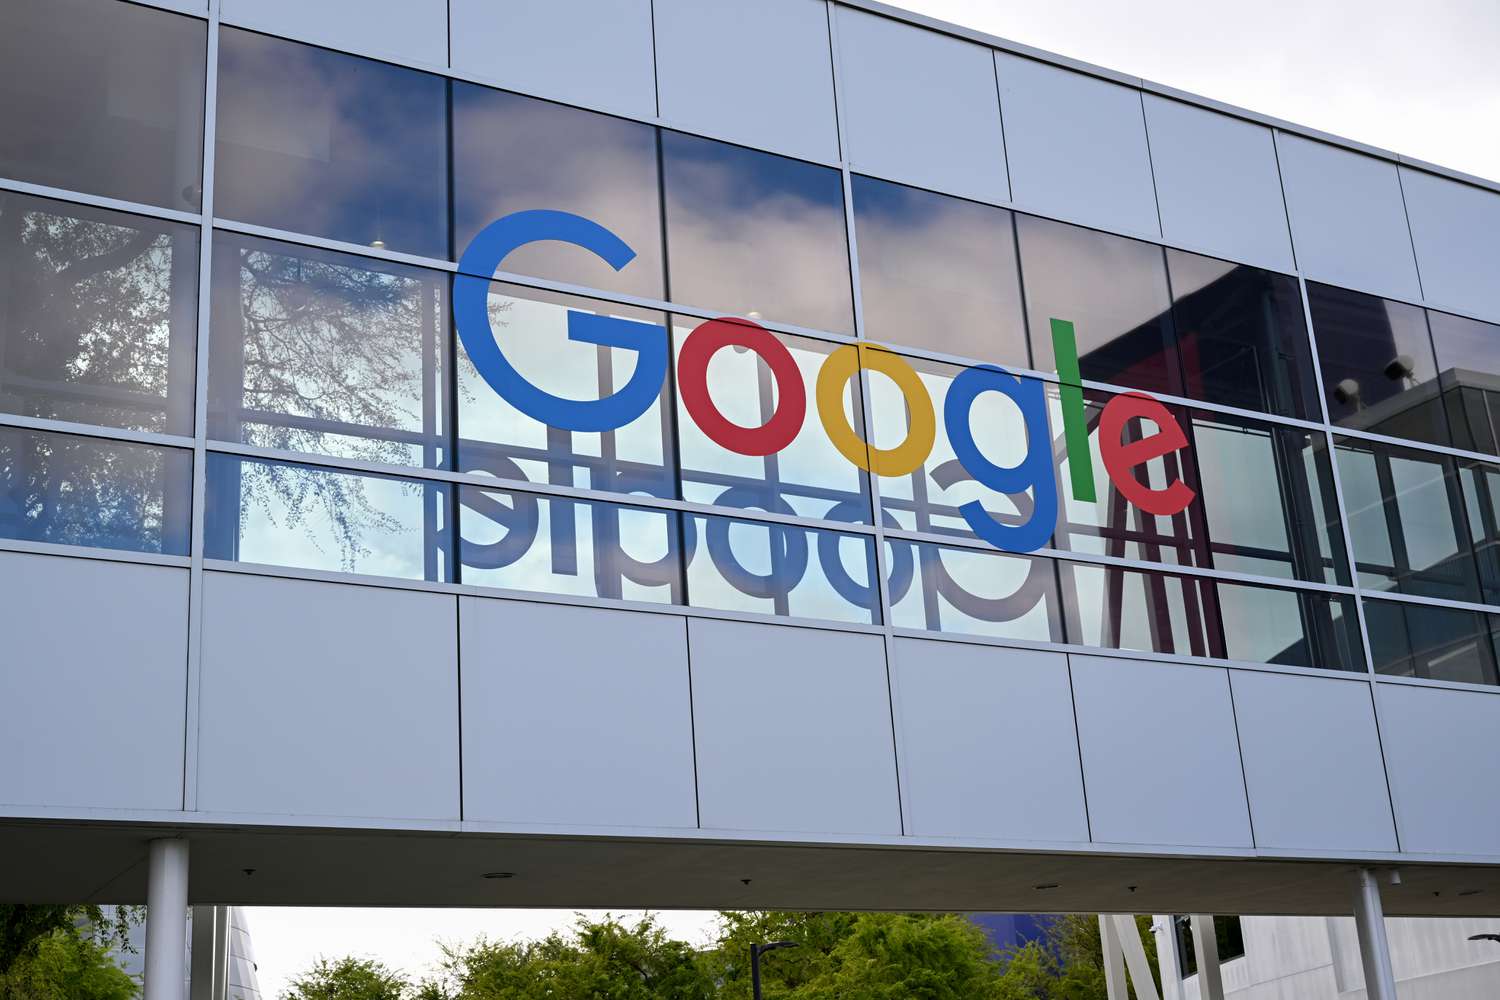 What You Need To Know Ahead of Google Parent Alphabet’s Earnings Report [Video]